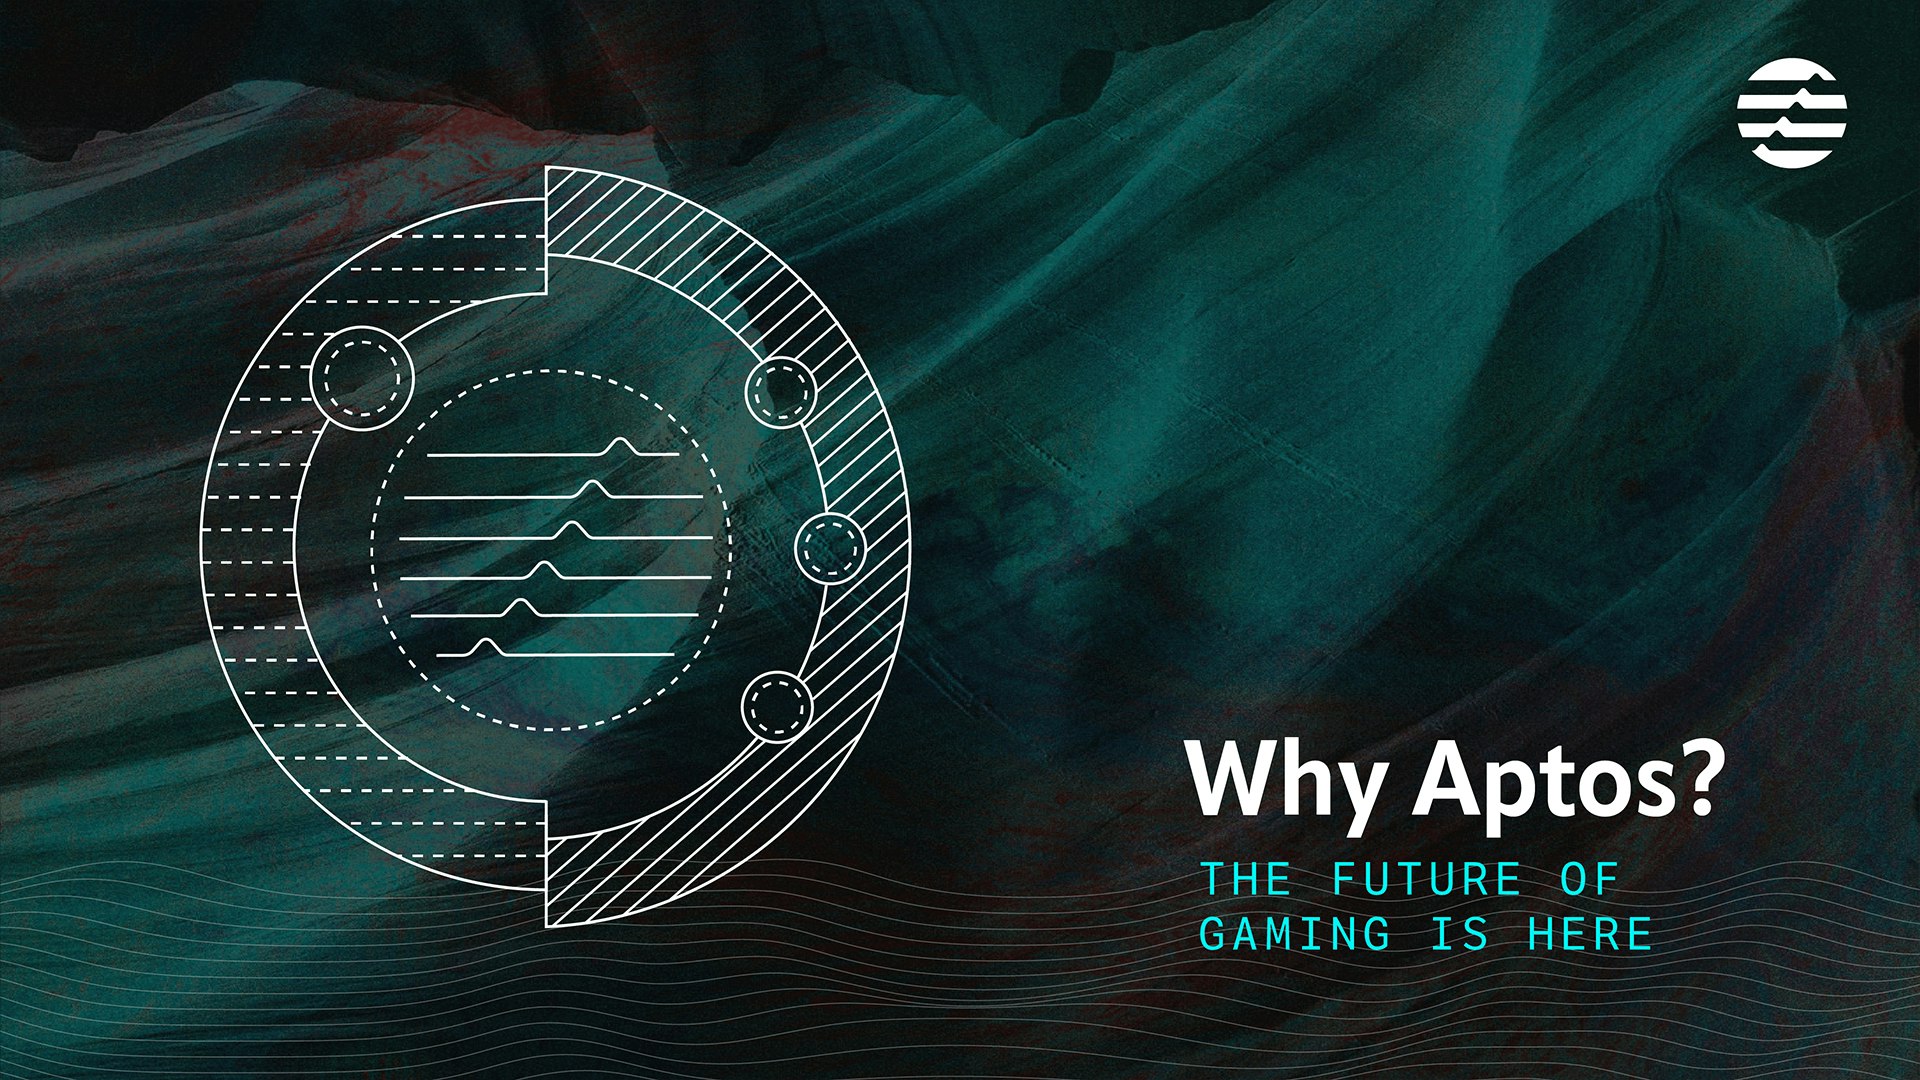 Why Aptos? The Future of Gaming is Here poster artwork